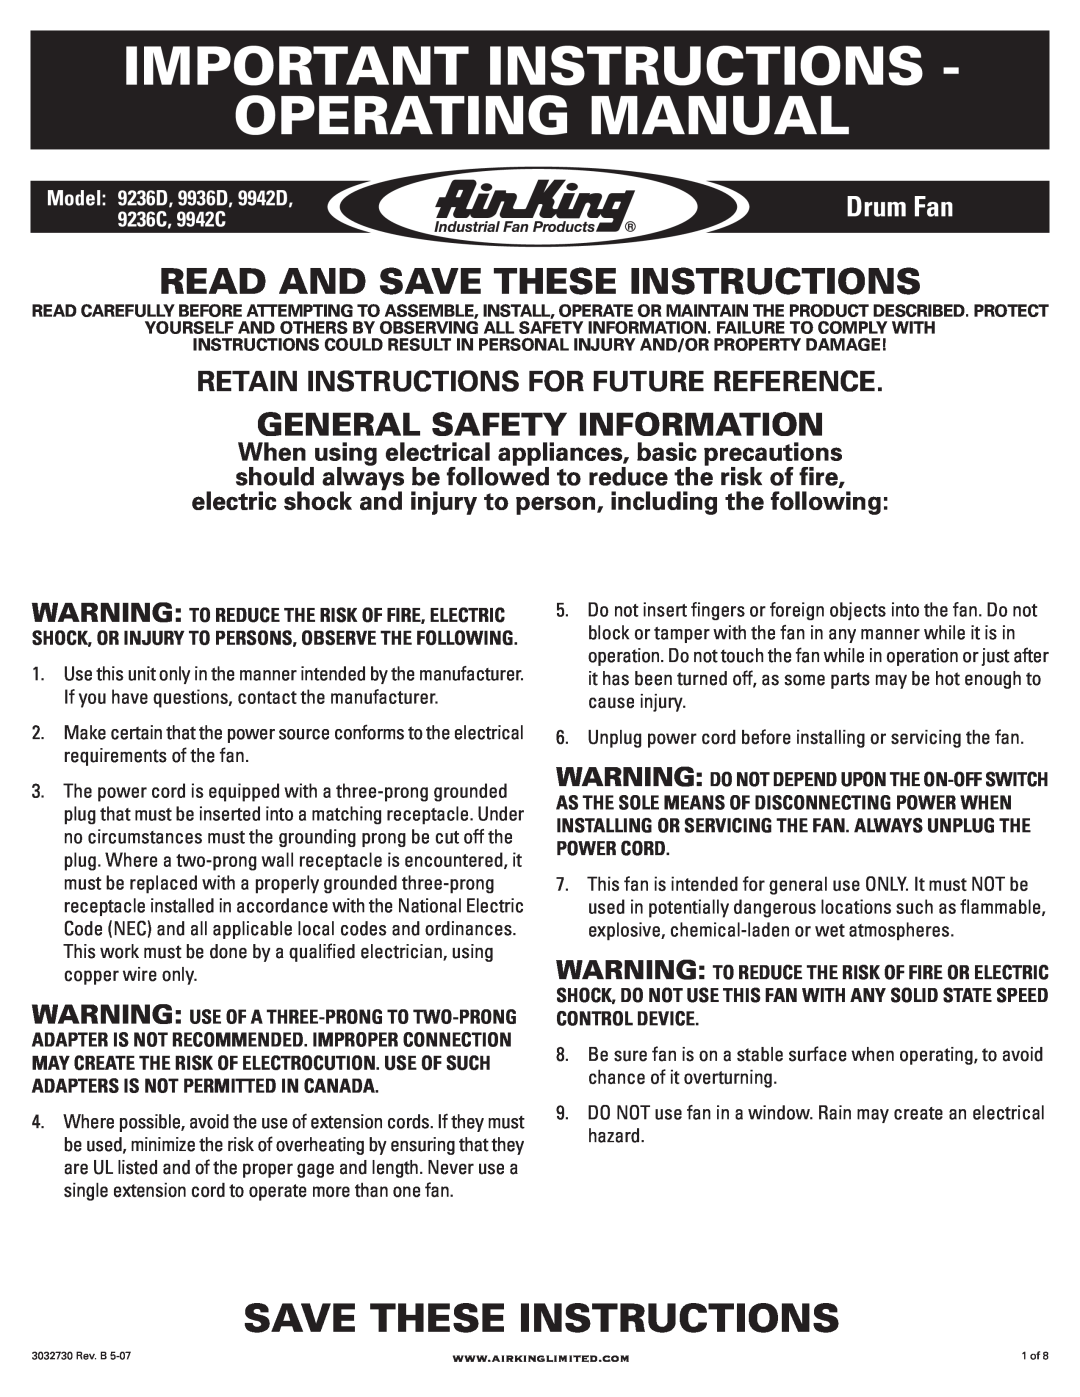 Air King 9942D, 9942C, 9236C manual Important Instructions Operating Manual, Read And Save These Instructions, Drum Fan 